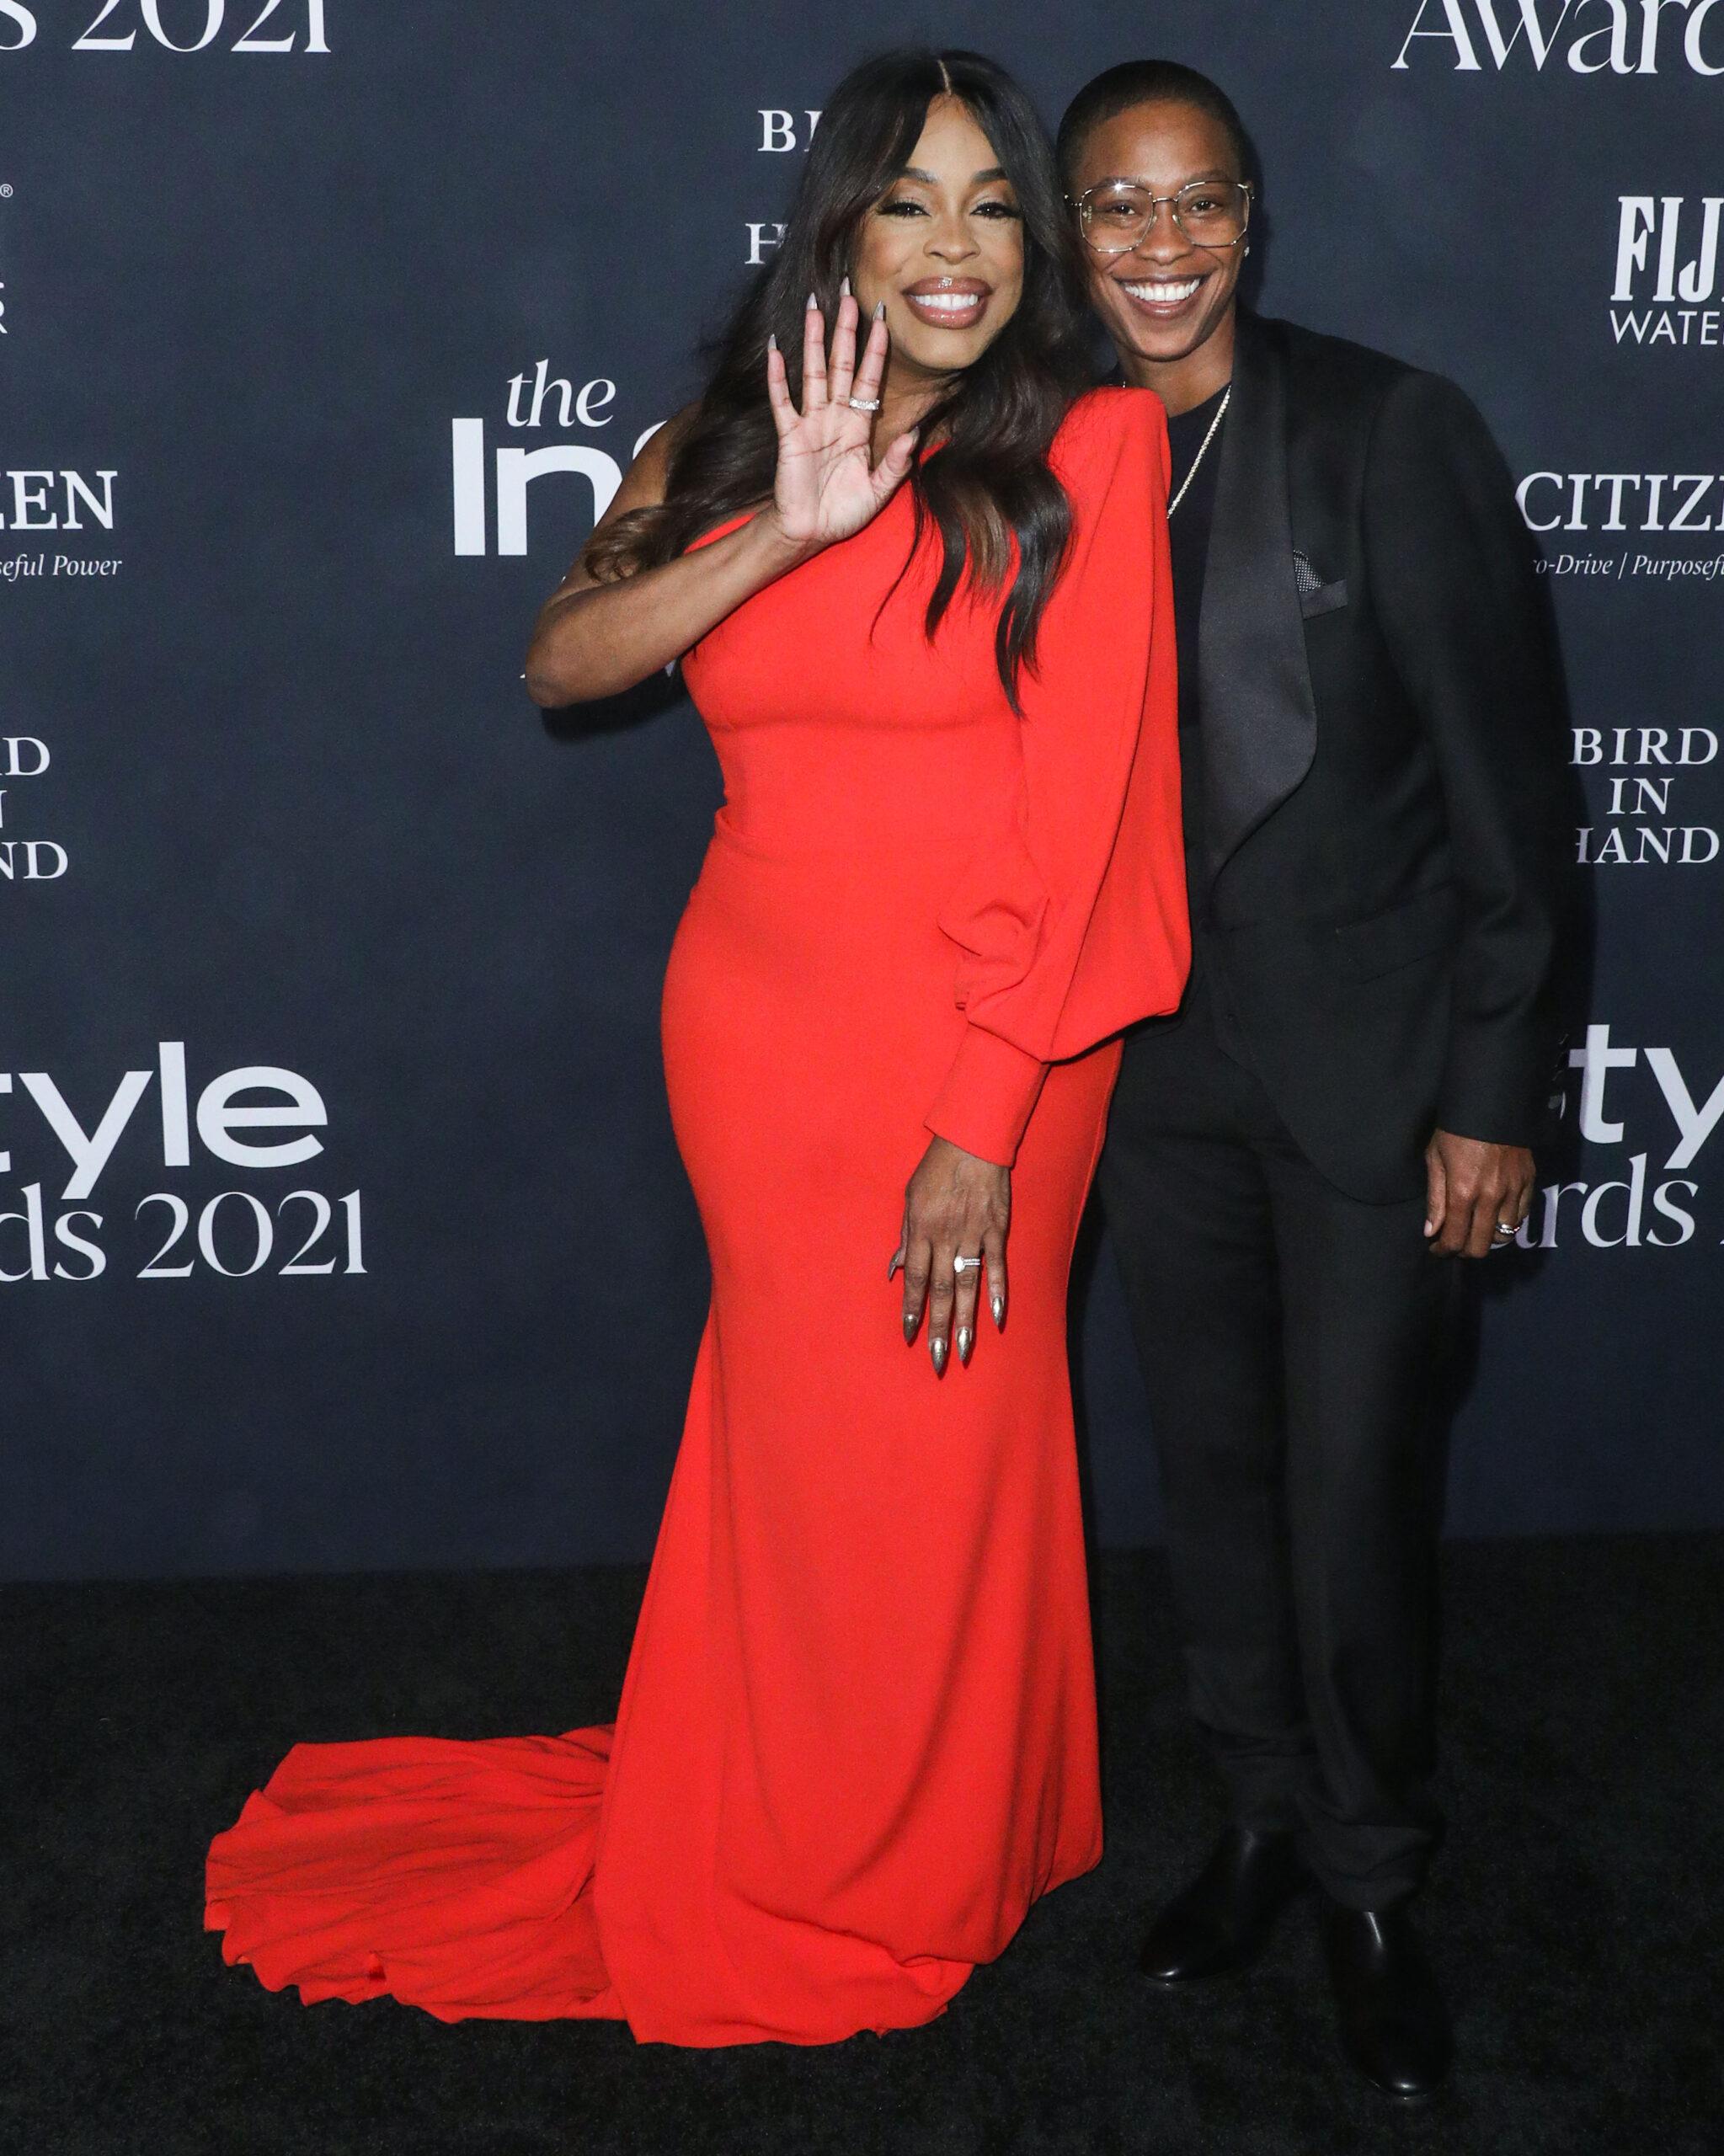 Niecy Nash and Jessica Betts at the 6th Annual InStyle Awards 2021